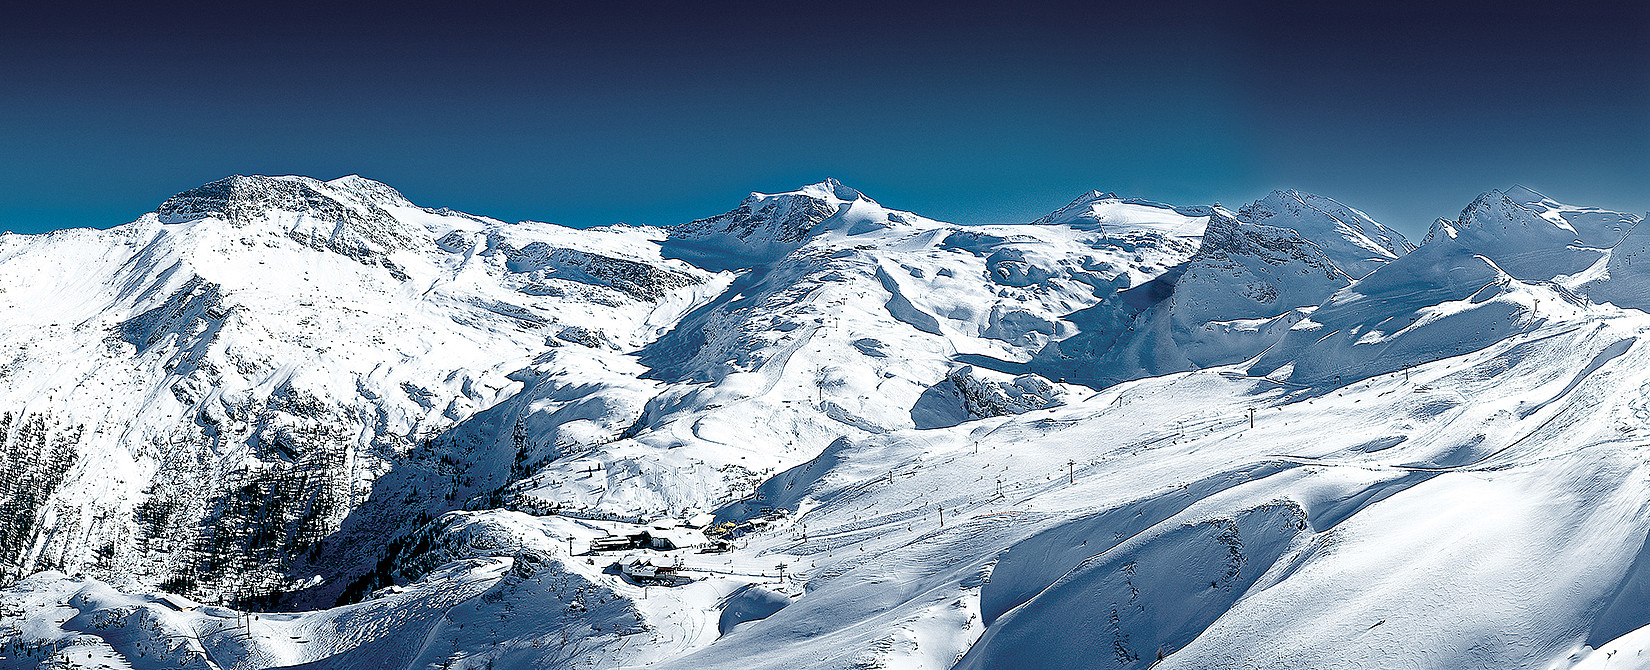 Skiing holidays in the Zillertal Valley - Tyrol